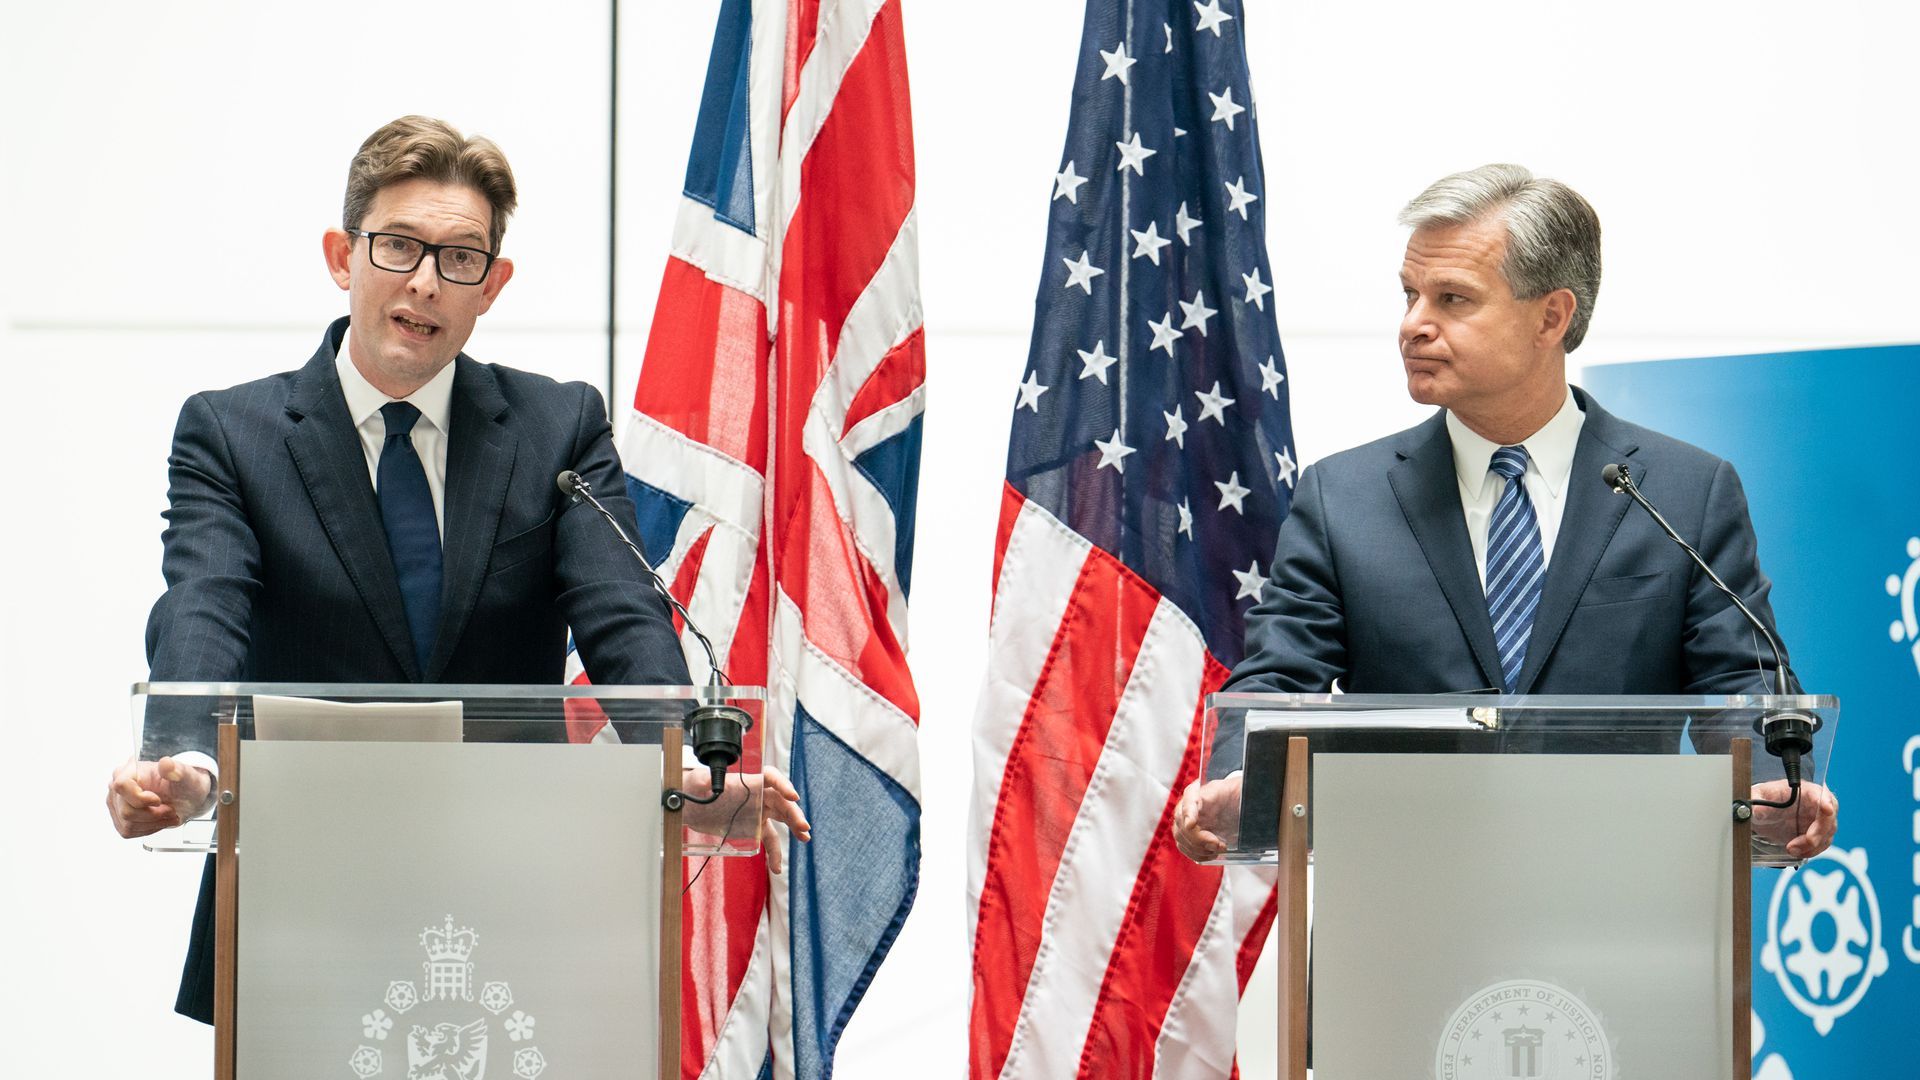 MI5 Director General Ken McCallum (left) and FBI Director Christopher Wray at a joint press conference at MI5 headquarters, in central London. 